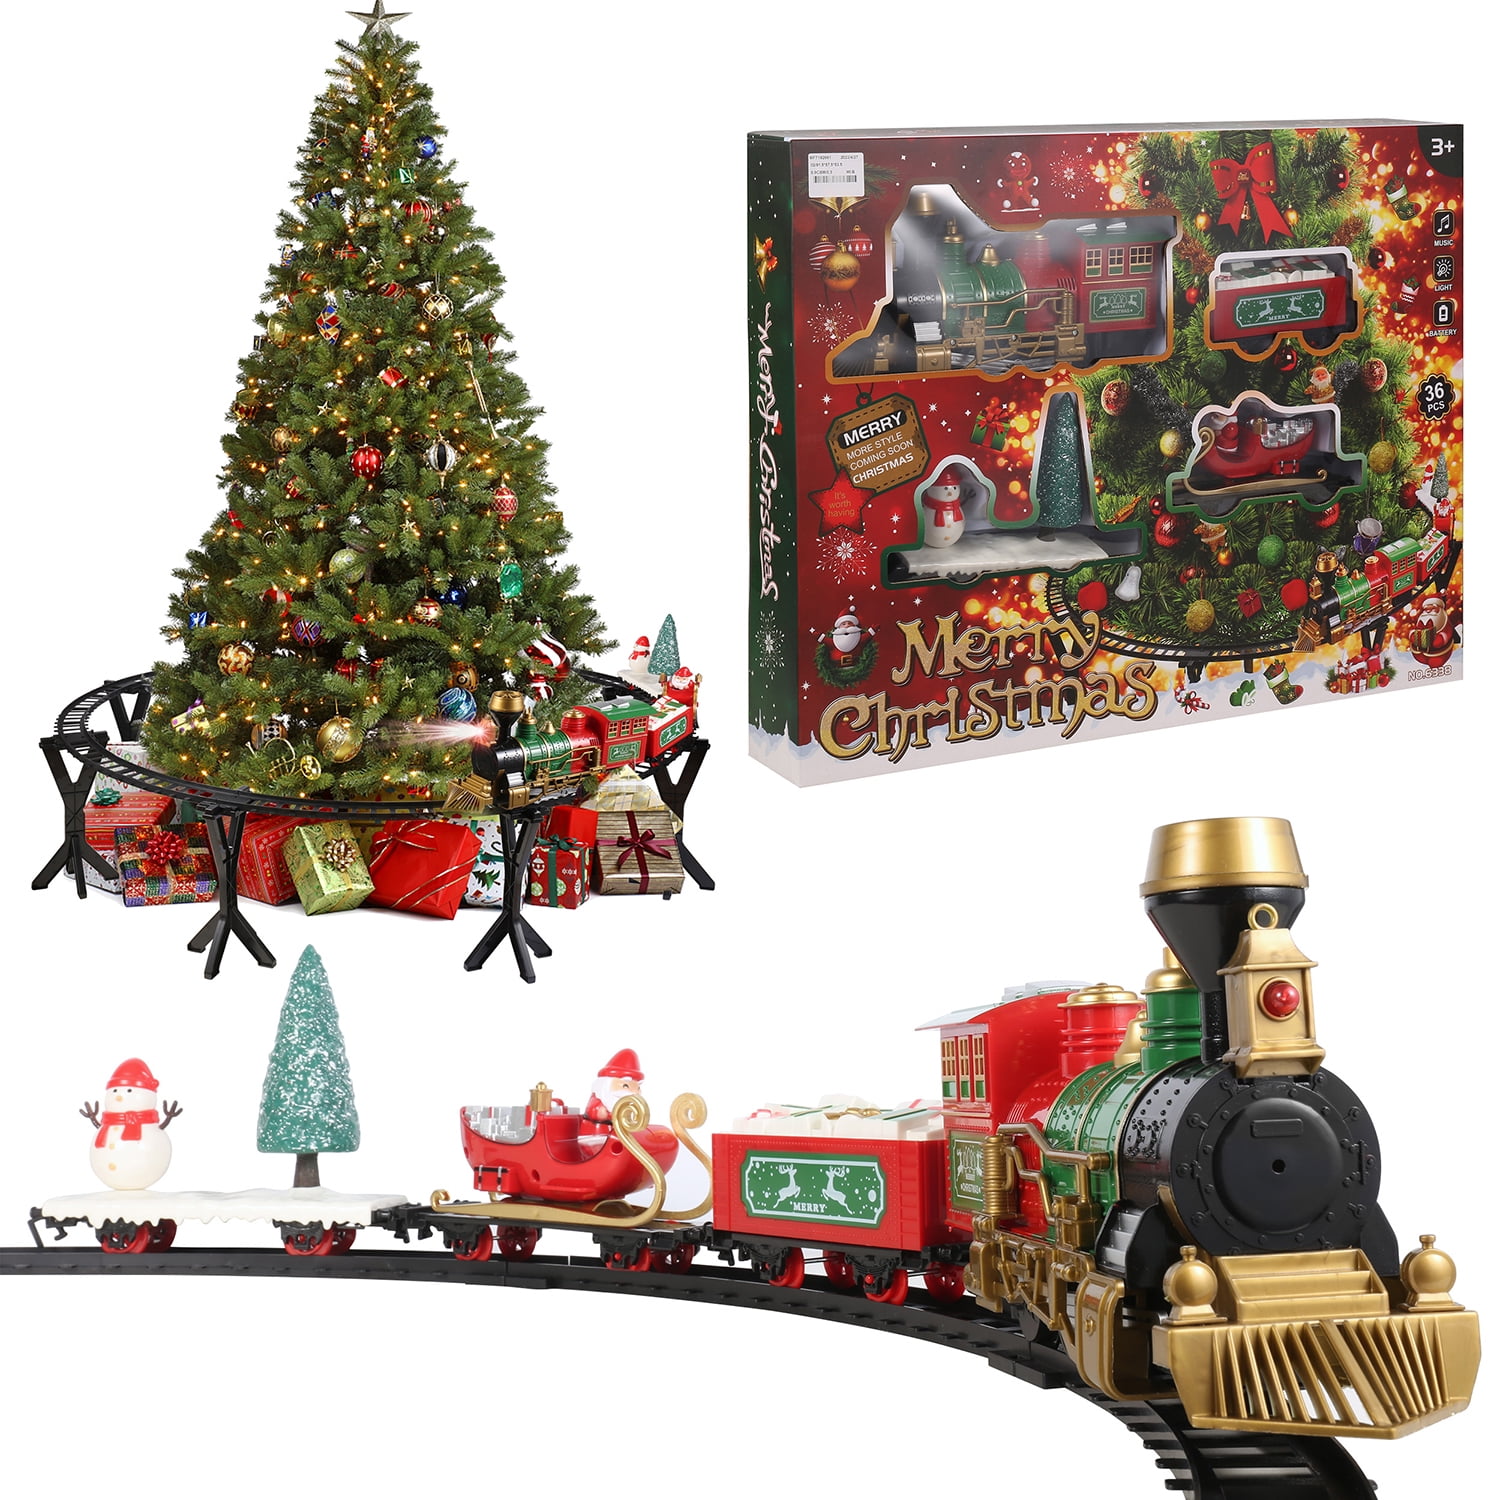 Christmas Train Set for Under The Tree with Lights and Sounds, Santa Clause Train Toy, Big Tracks with Stand, Christmas Decoration Gift for Kids - Walmart.com